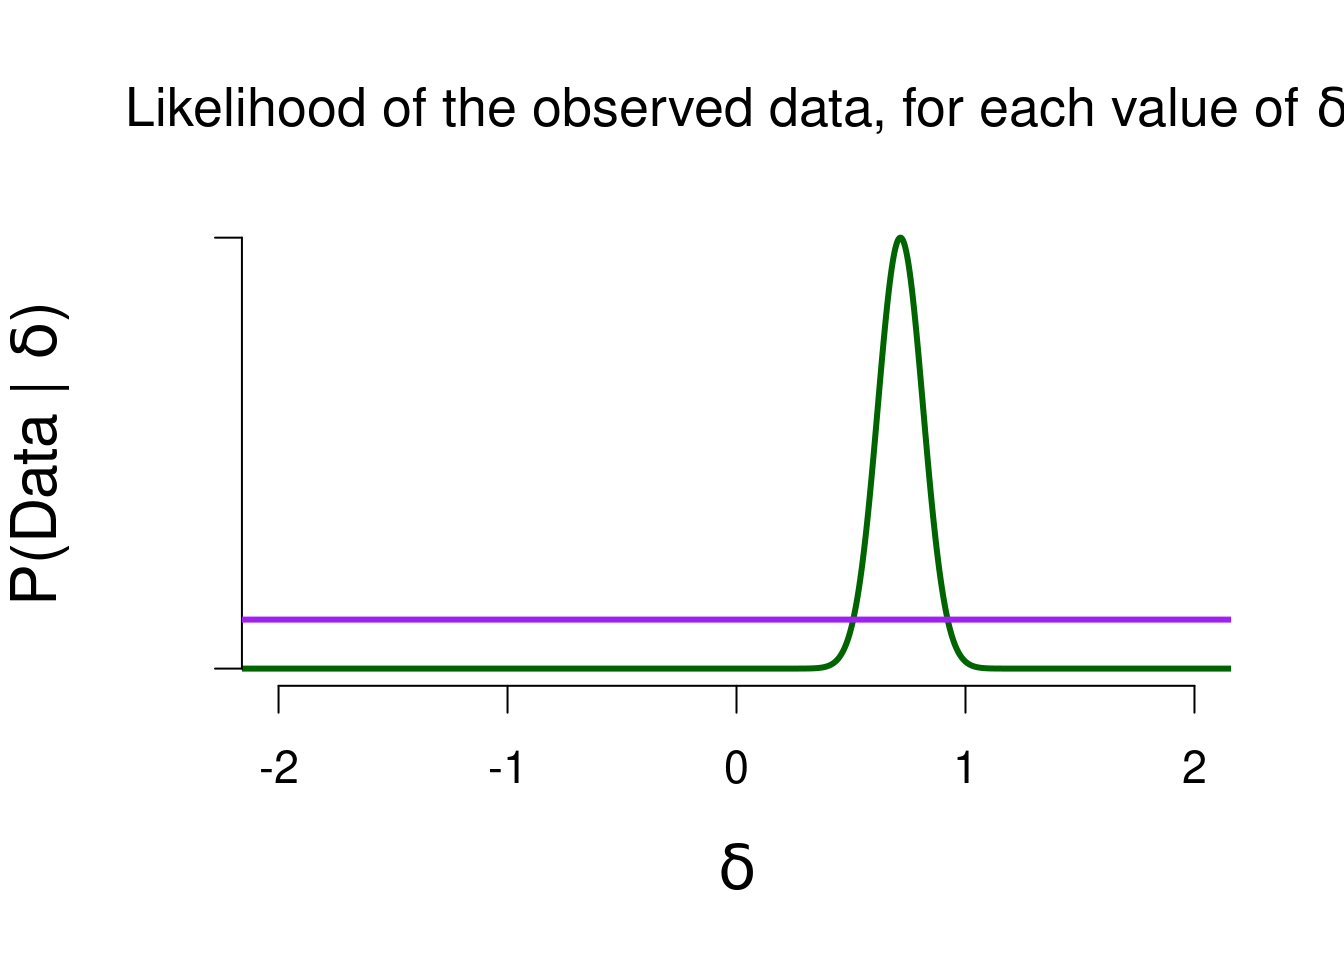 The likelihood of the observed data, for various values of delta. The higher the likelihood, the better that value predicted the data.